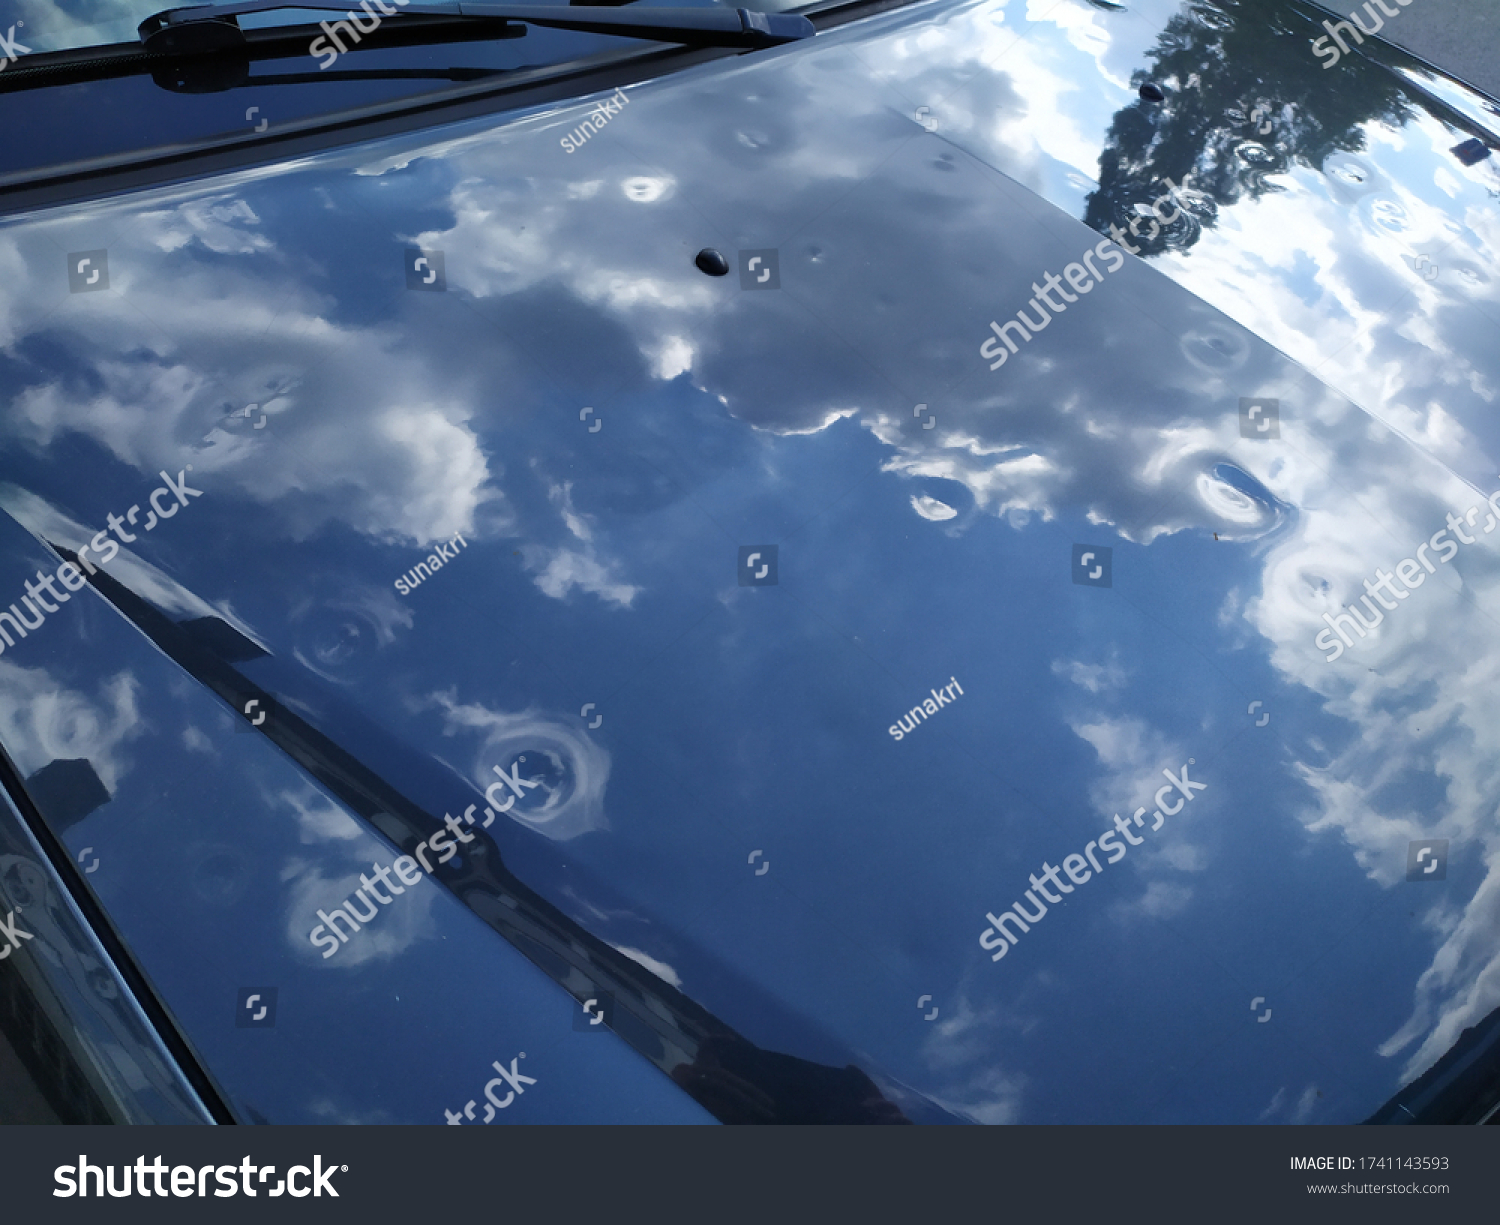 On a car hood, in nature